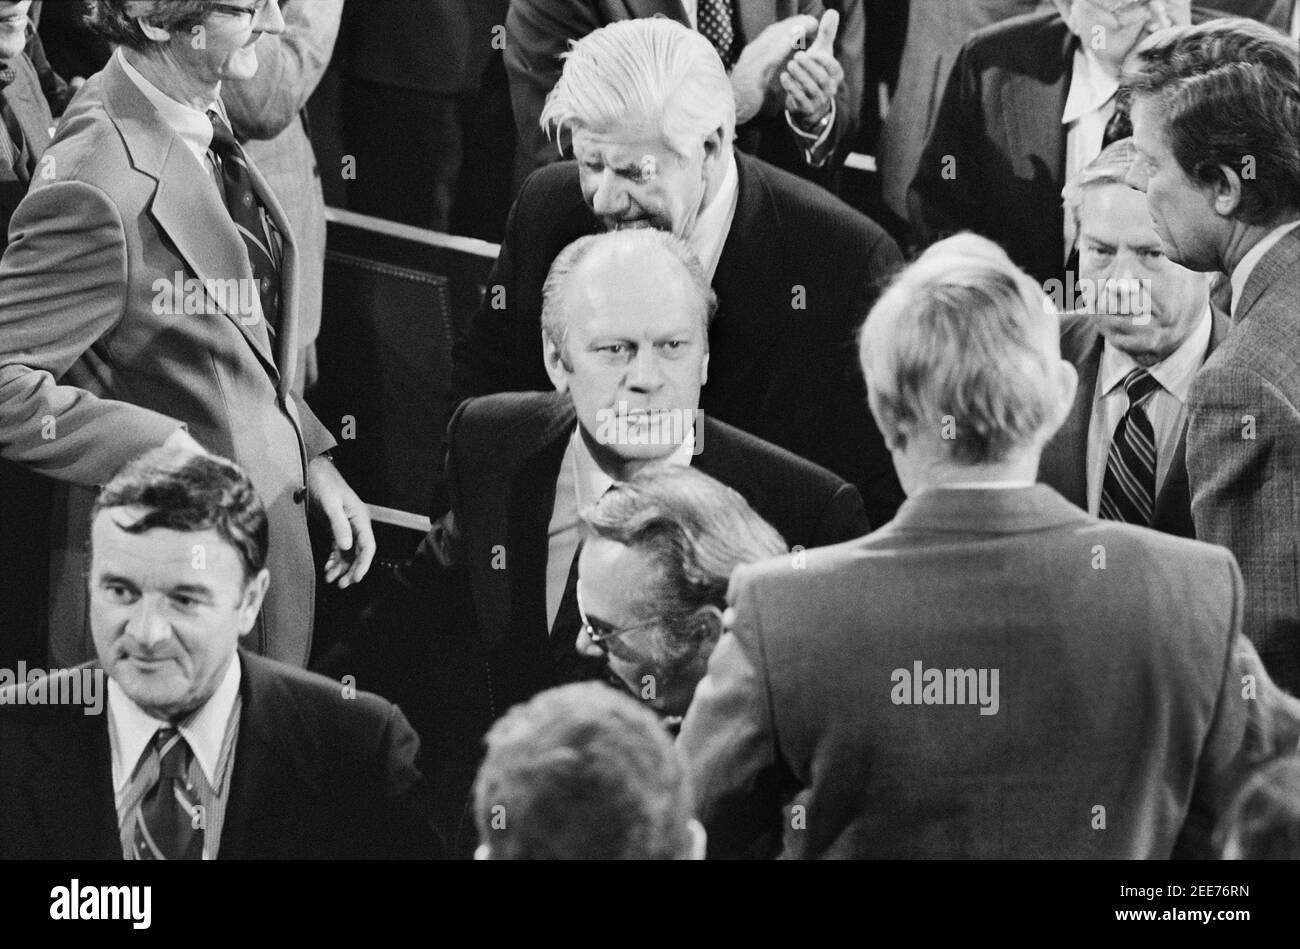 U.S. President Gerald Ford surrounded by members of the 94th Congress, including Majority Leader Tip O'Neill, after delivering the State of the Union Address, Washington, D.C., USA, Marion S. Trikosko, January 15, 1975 Stock Photo